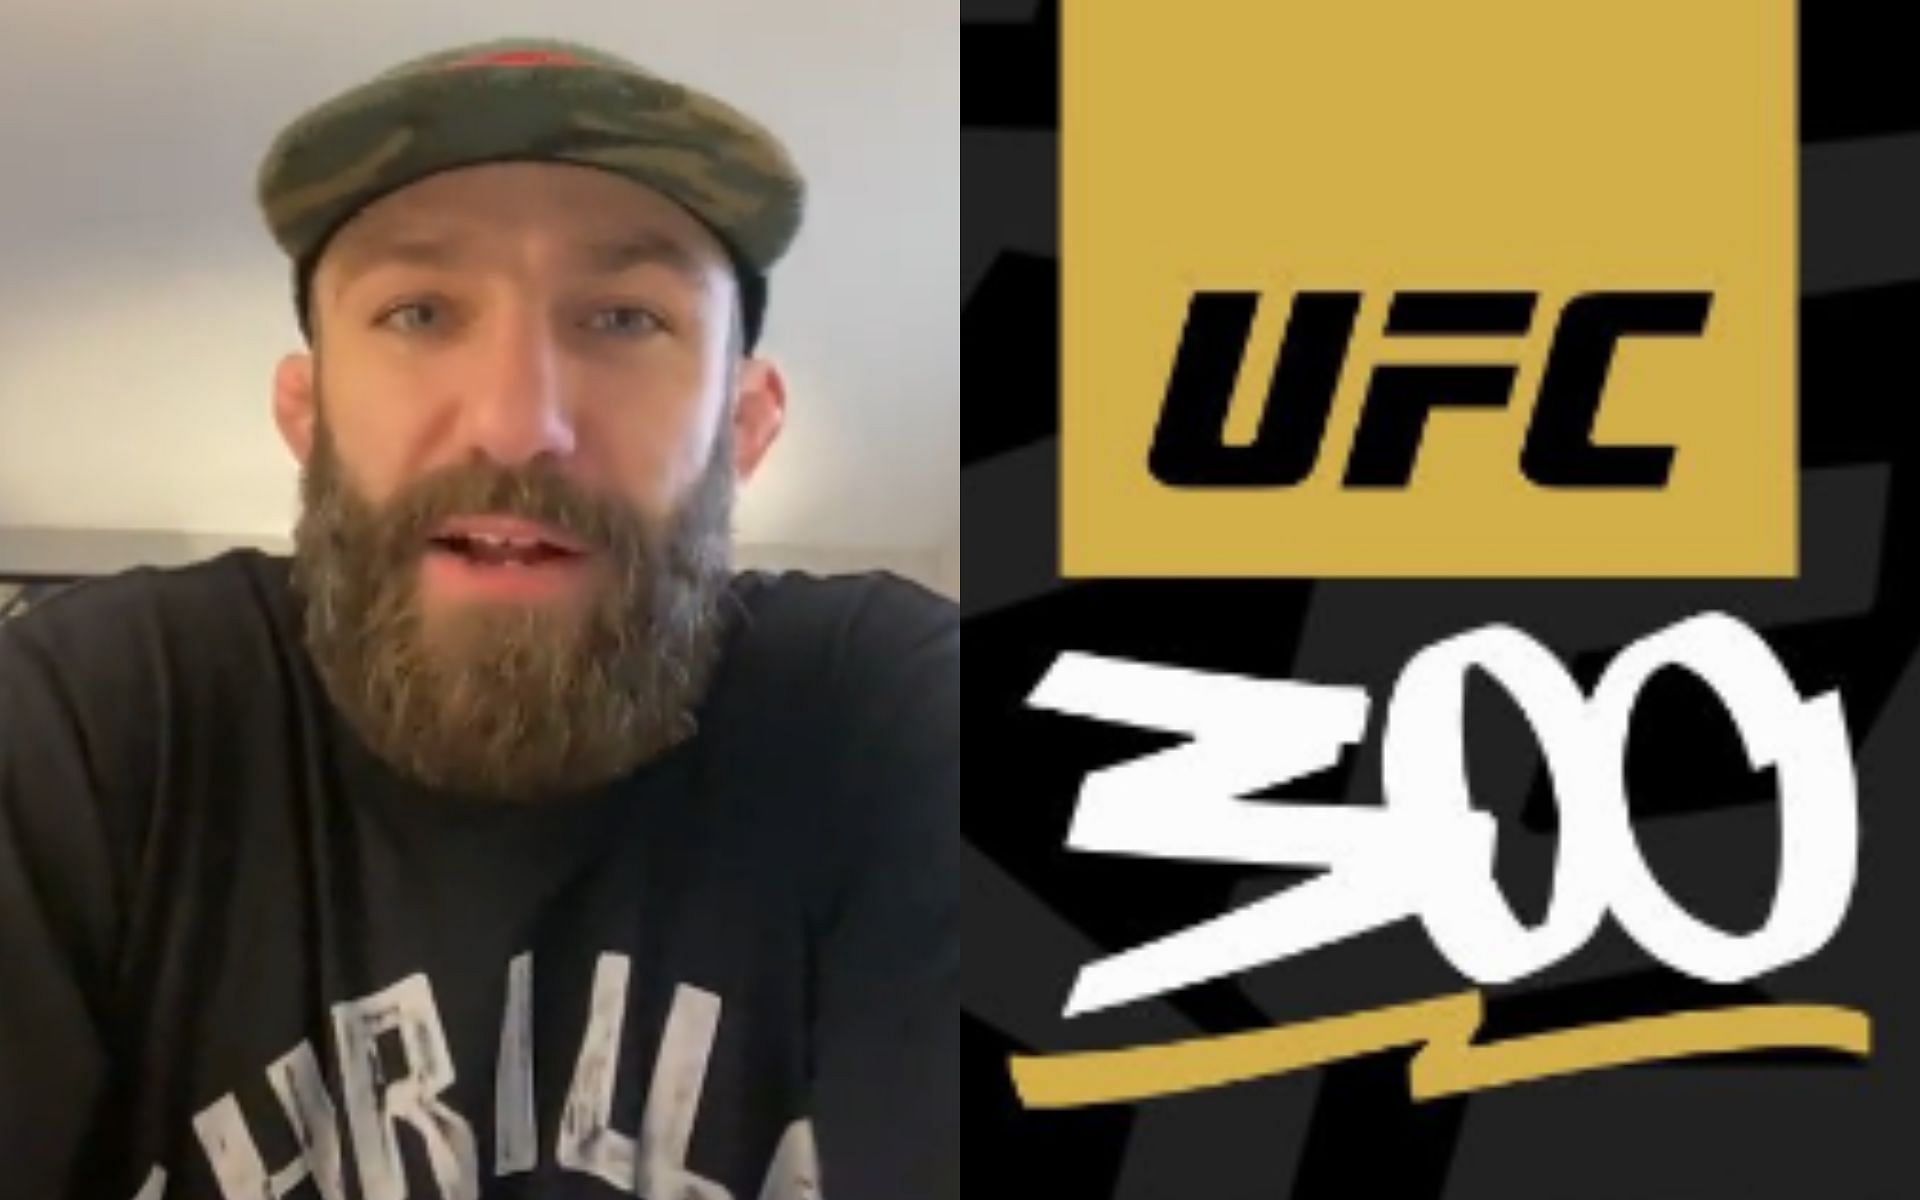 Michael Chiesa [Left] says he wants to see two former heavyweight champions fight at UFC 300 [Right] [Image courtesy: @MikeMav22 and @UFC - X]